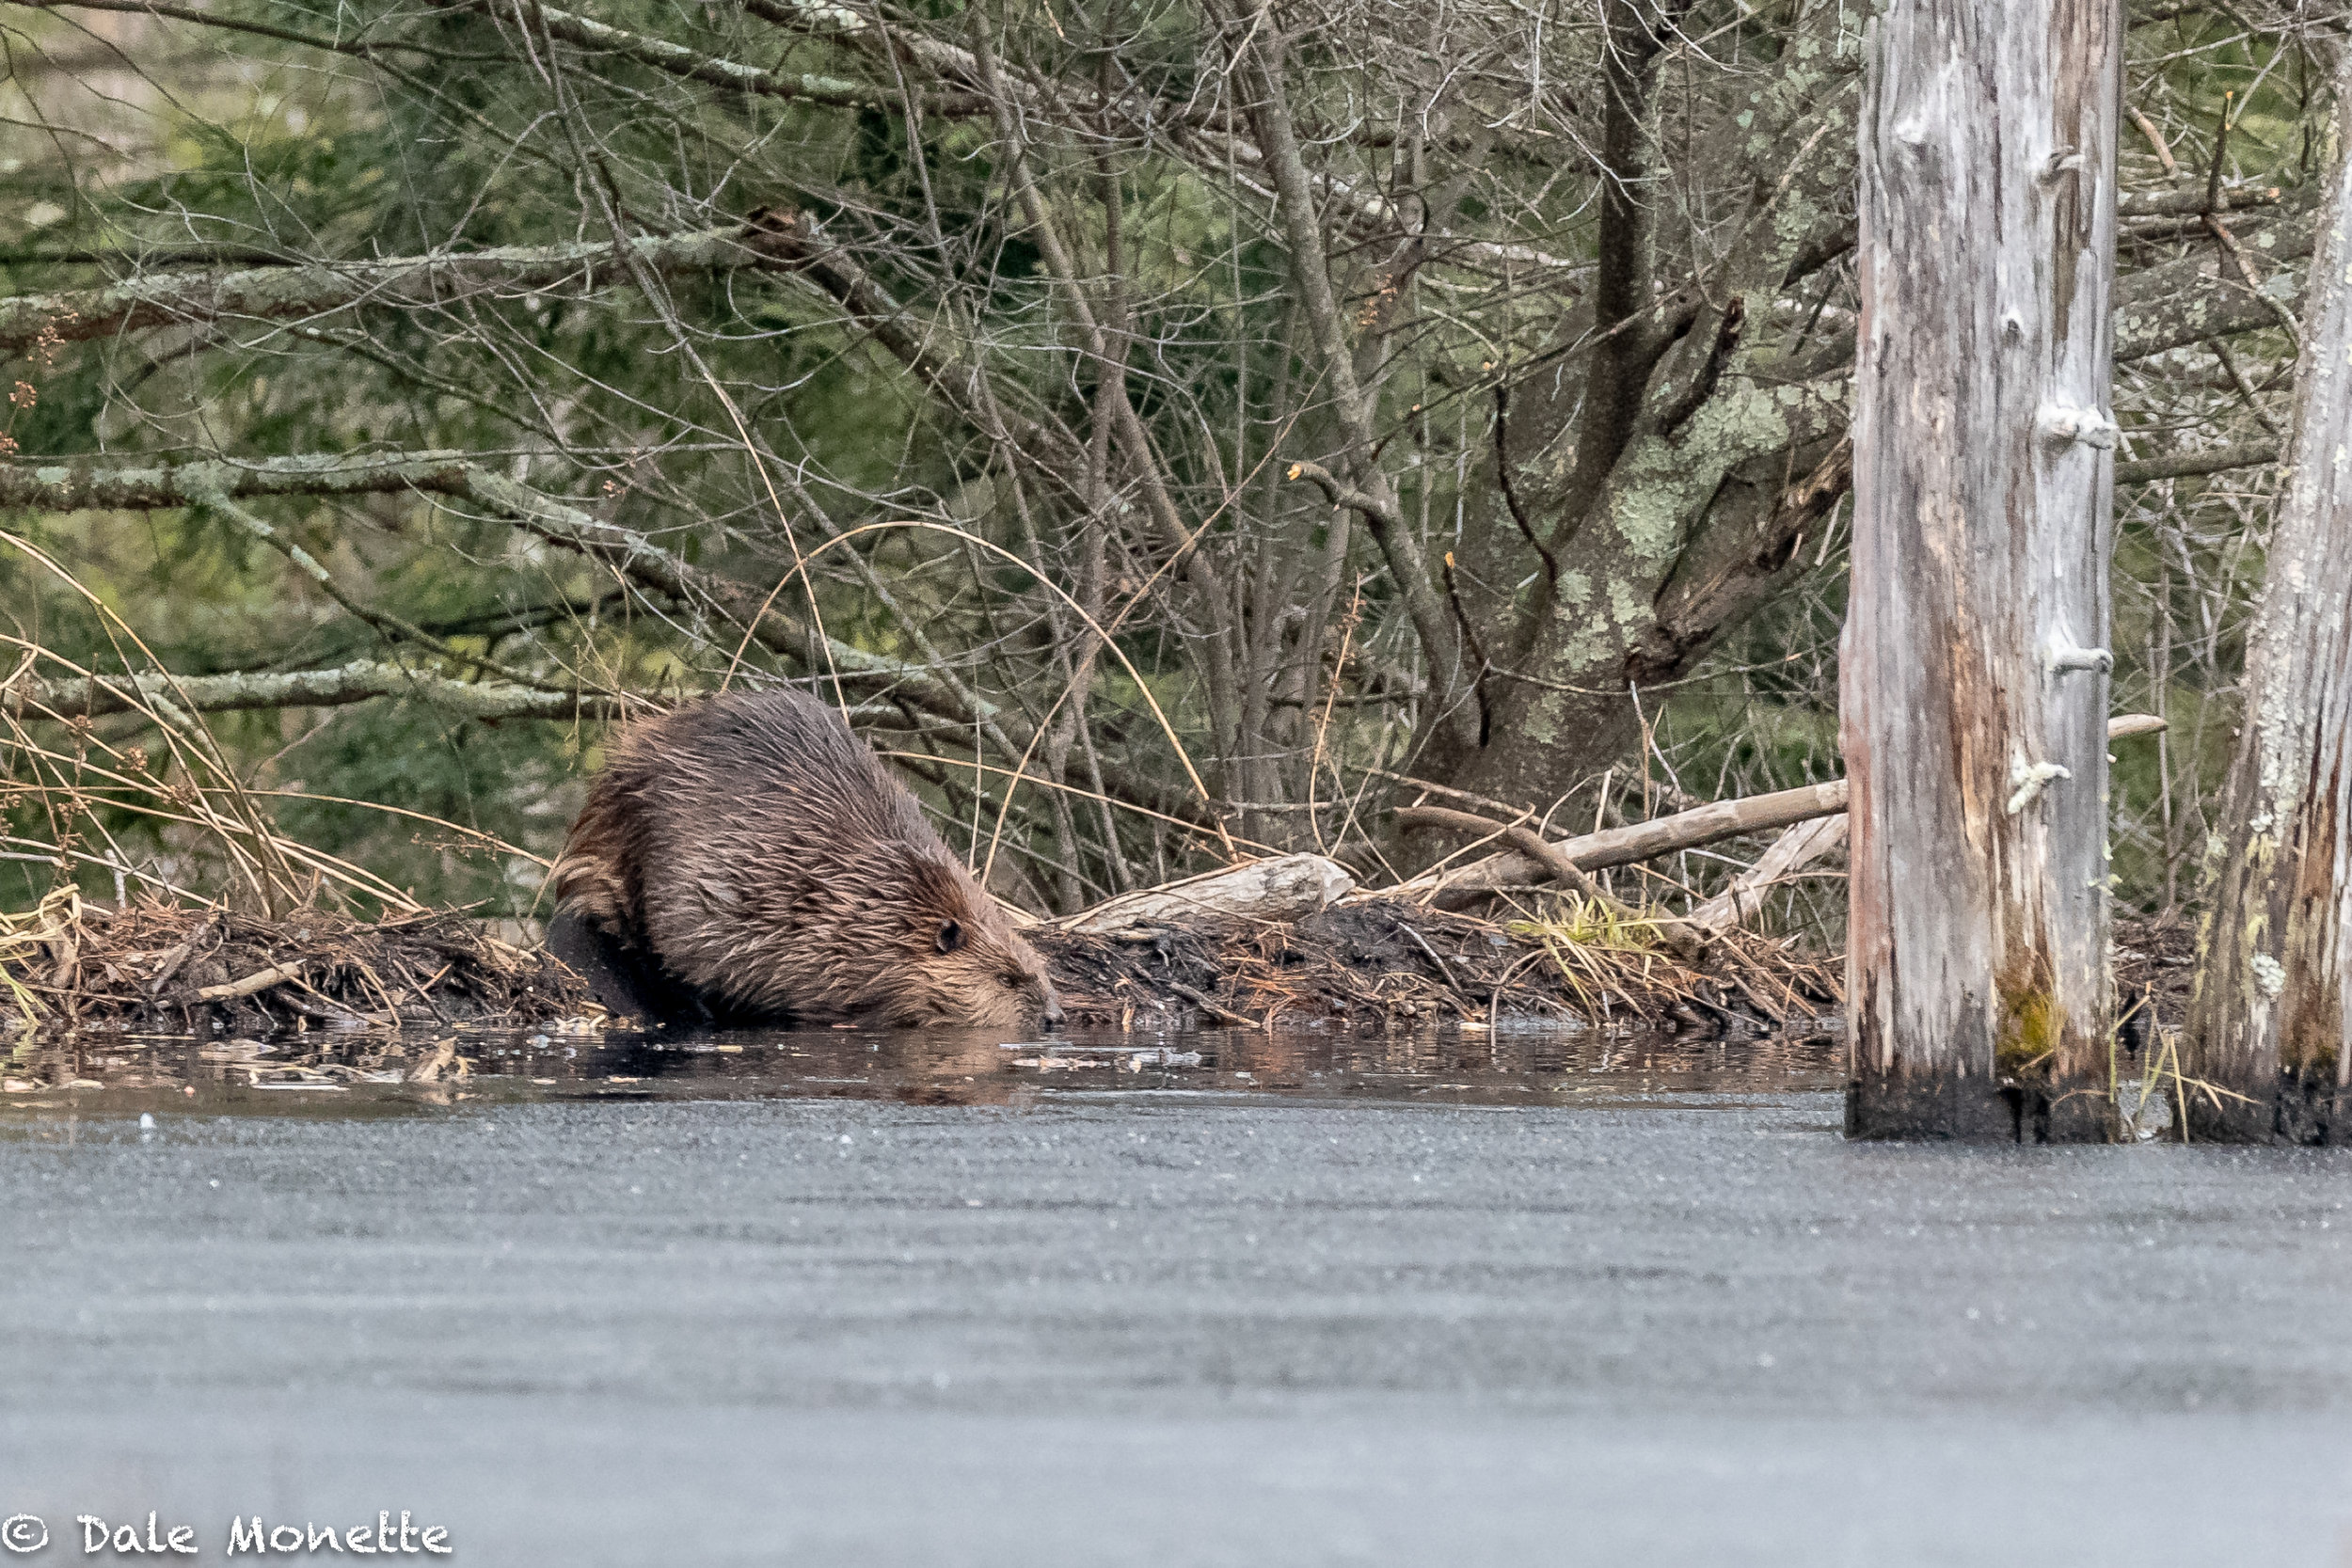   I haven't been into this pond in almost 2 years. Today I decided to hike in to see if my old beaver buddies were around. I was greeted by a huge '"ka--thump" before I could even see the dam and there were 2 of them ! After catching up for about 45 